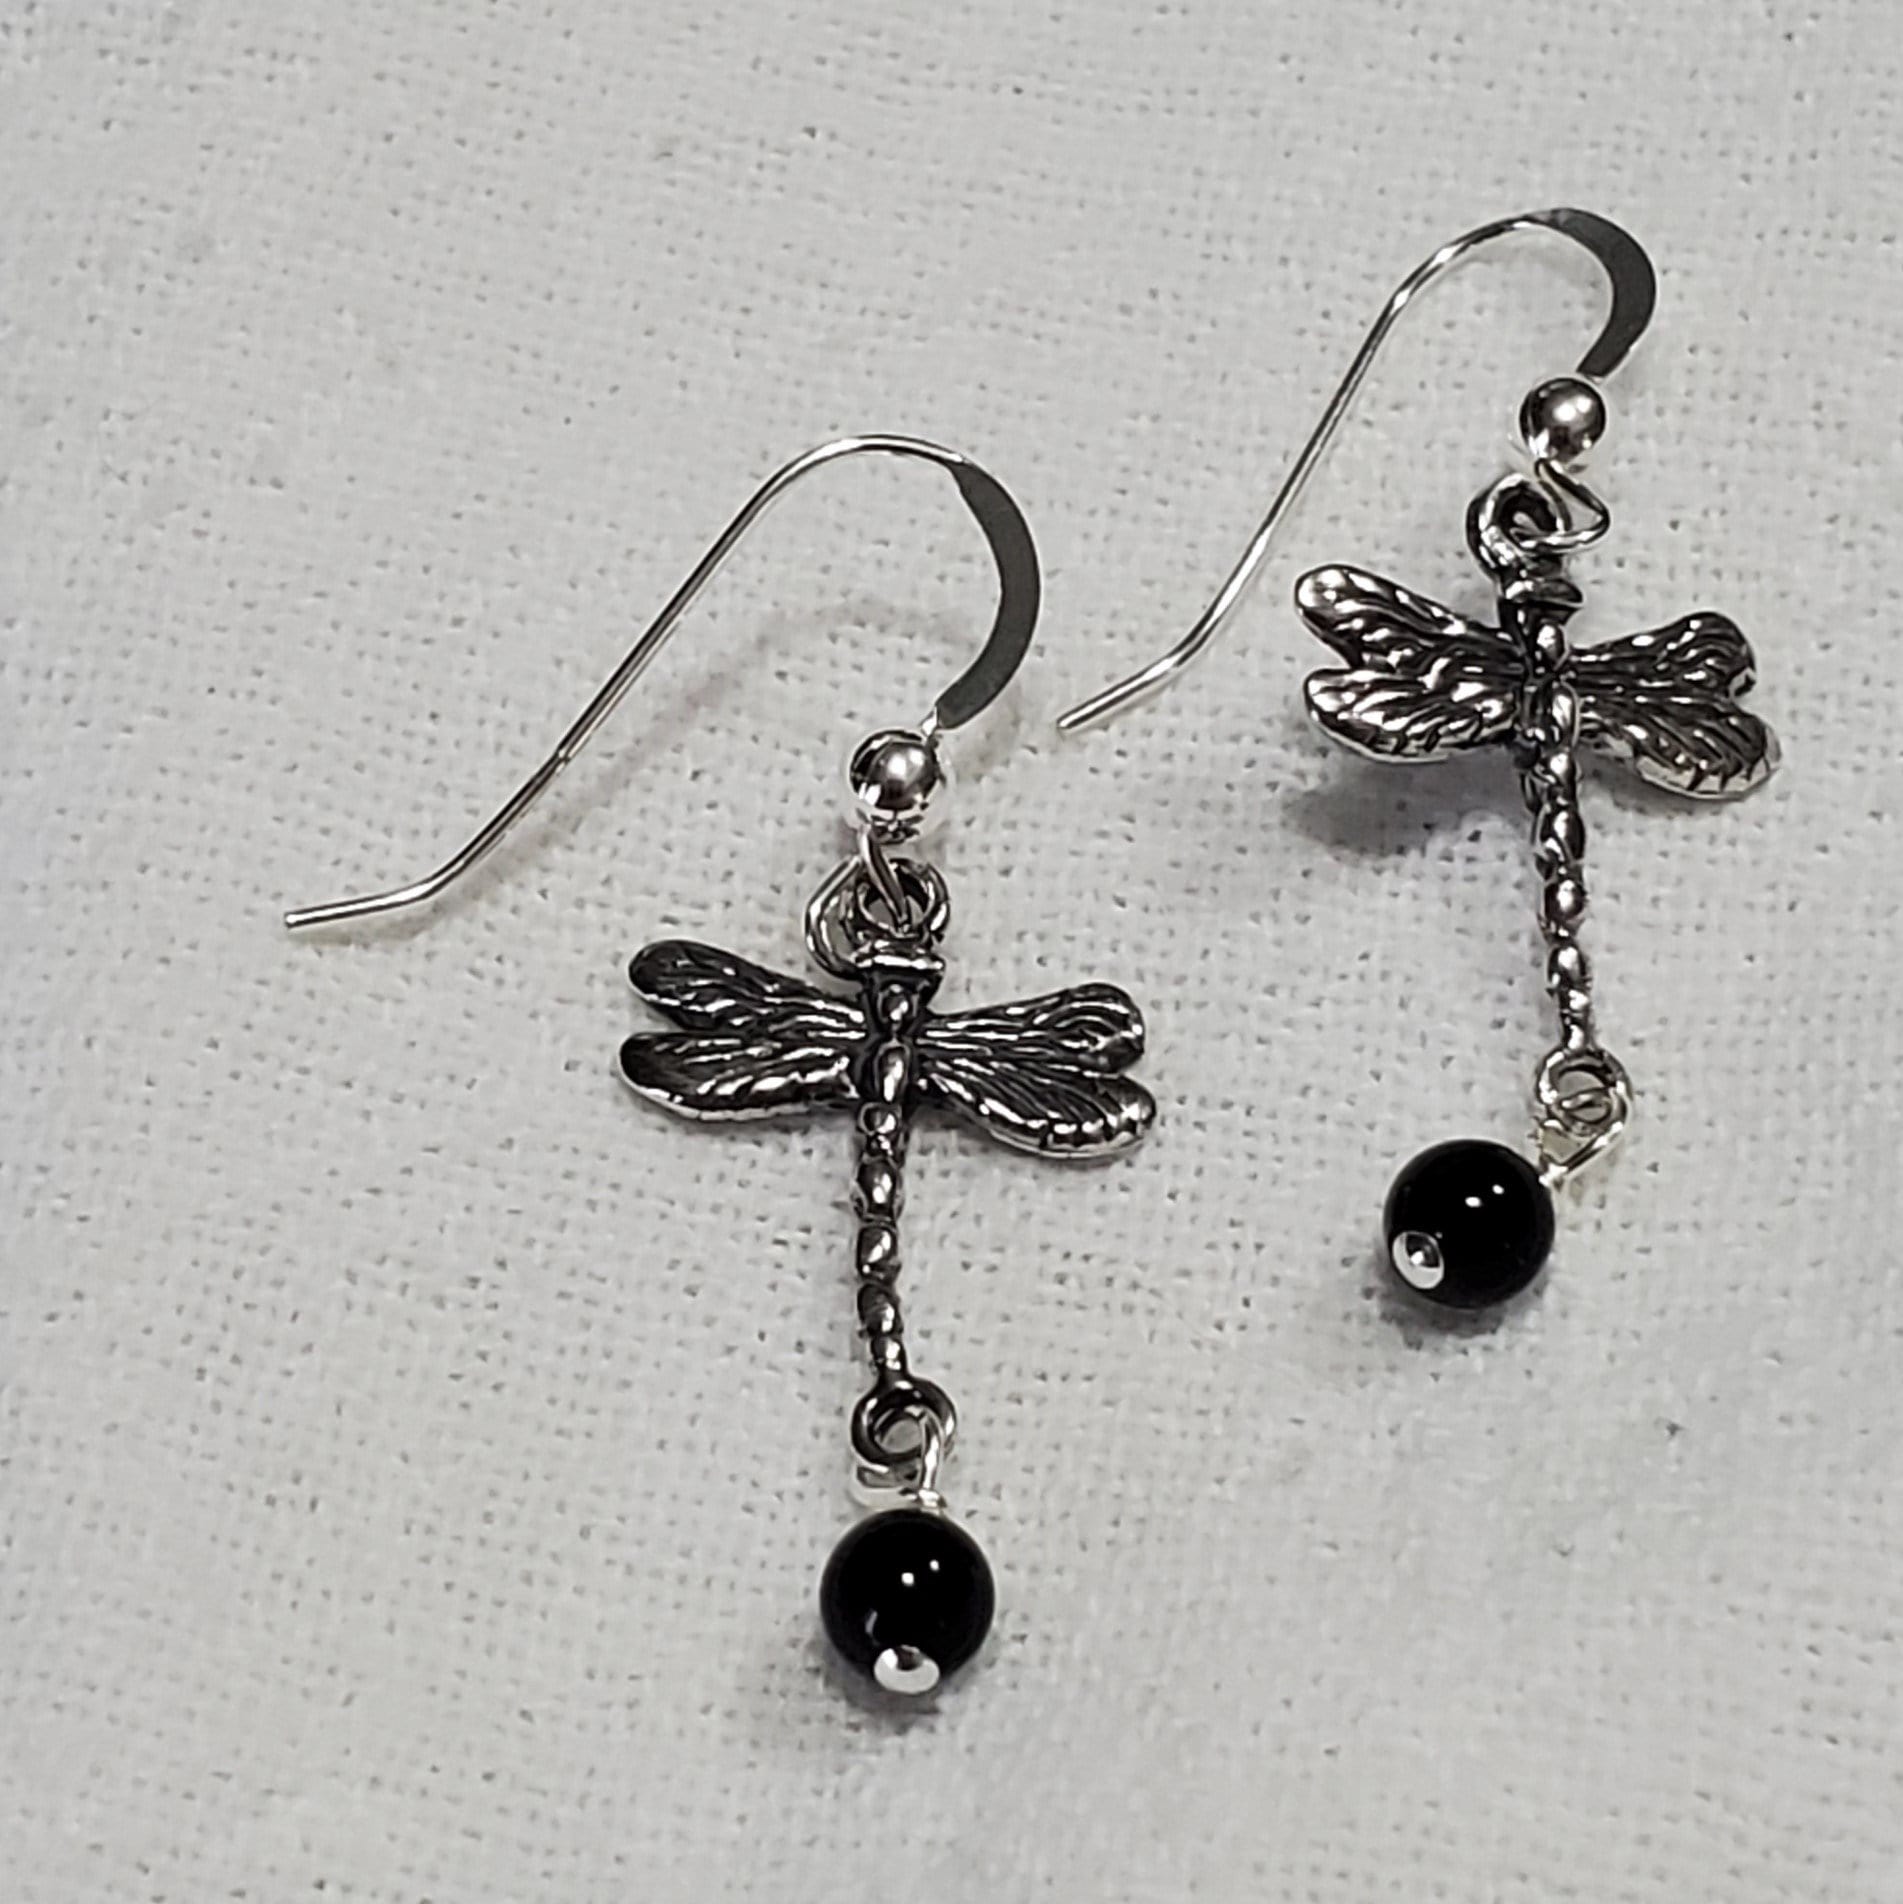 Delicate wire earrings. Incredible detail depicting dragonflies . Dragonflies symbolize poise and maturity. 